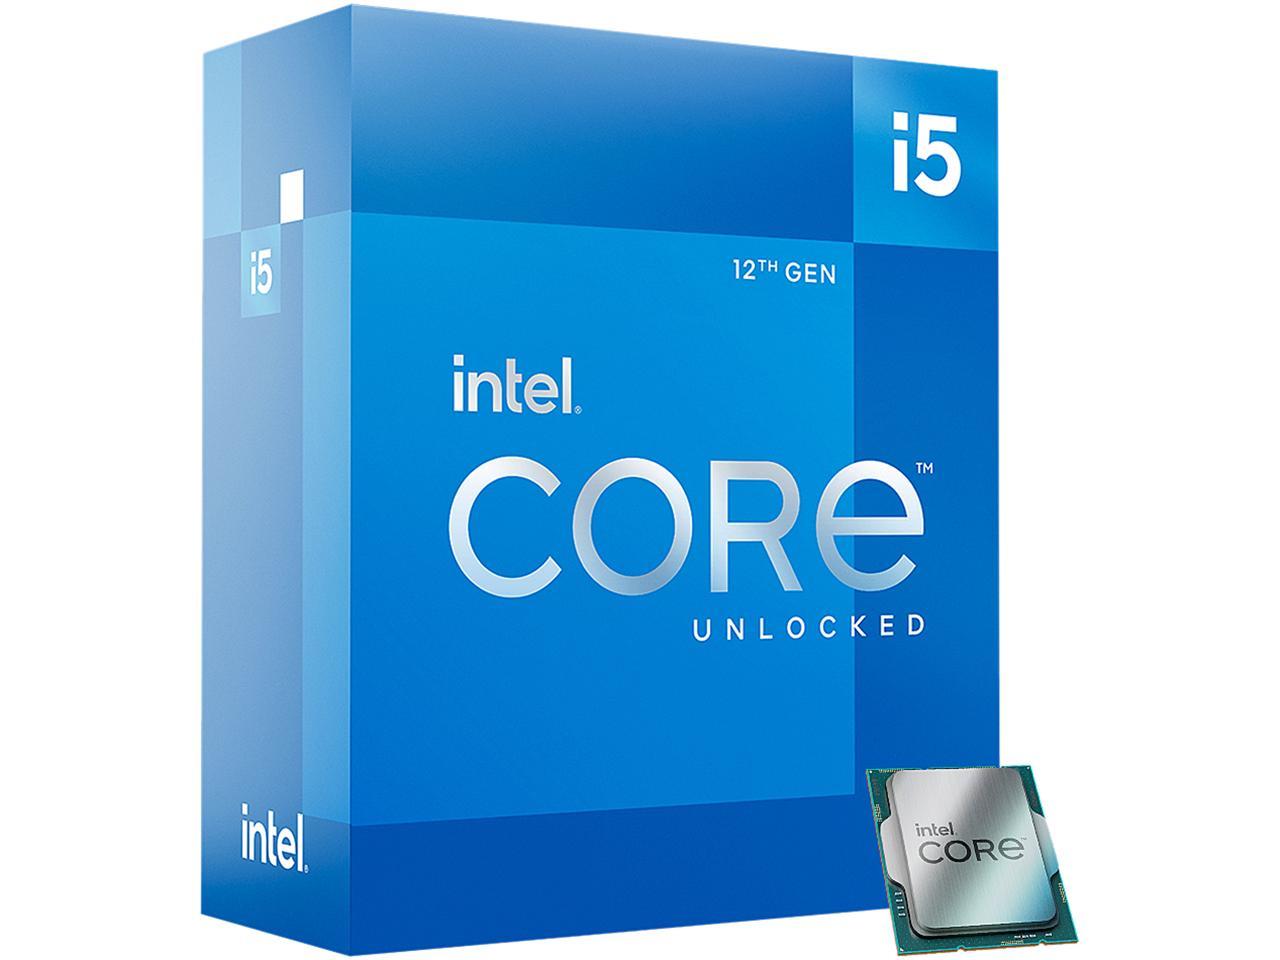 Intel Core i5-12600K receives excellent discount in new deal – NotebookCheck.net News